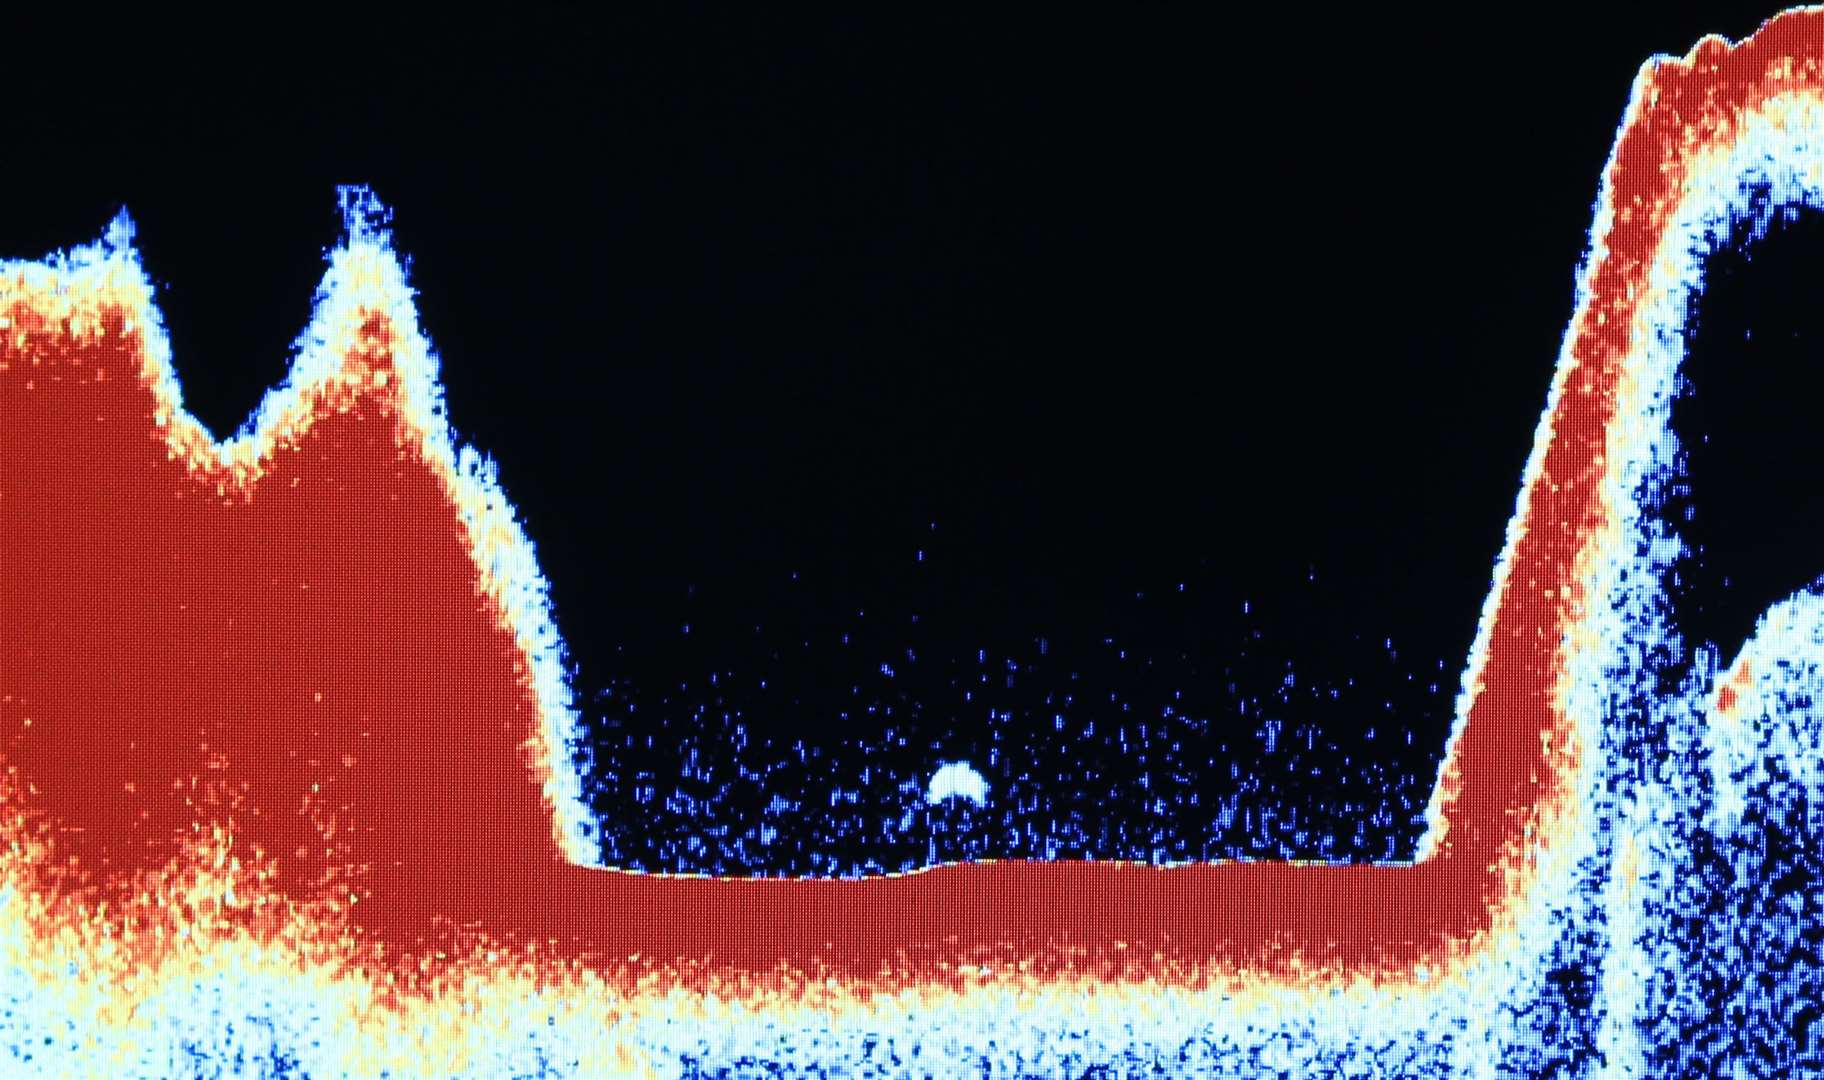 Sonar image taken at Loch Ness by tour boat skipper Ronald Mackenzie. Picture: Peter Jolly